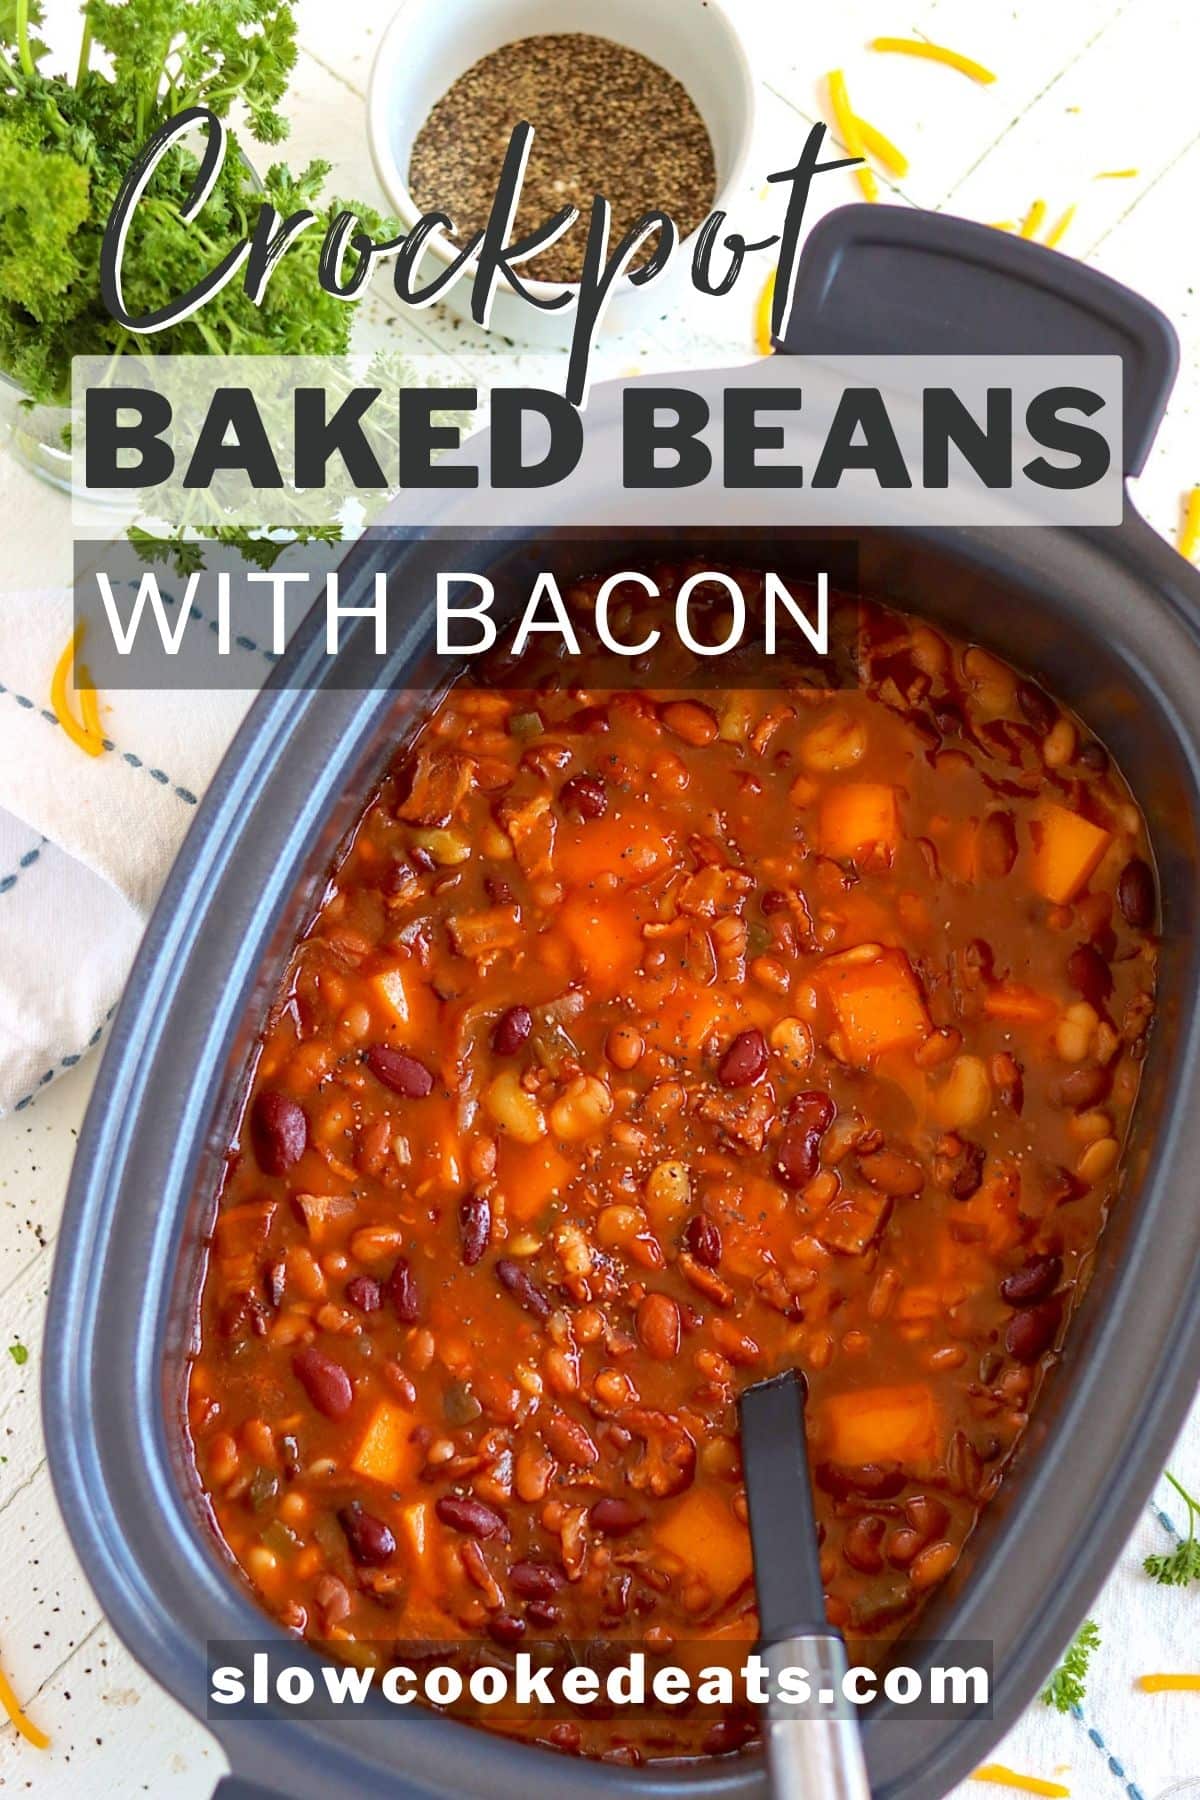 Pinterest pin with a black oval crock pot full of baked beans with melting cheese.